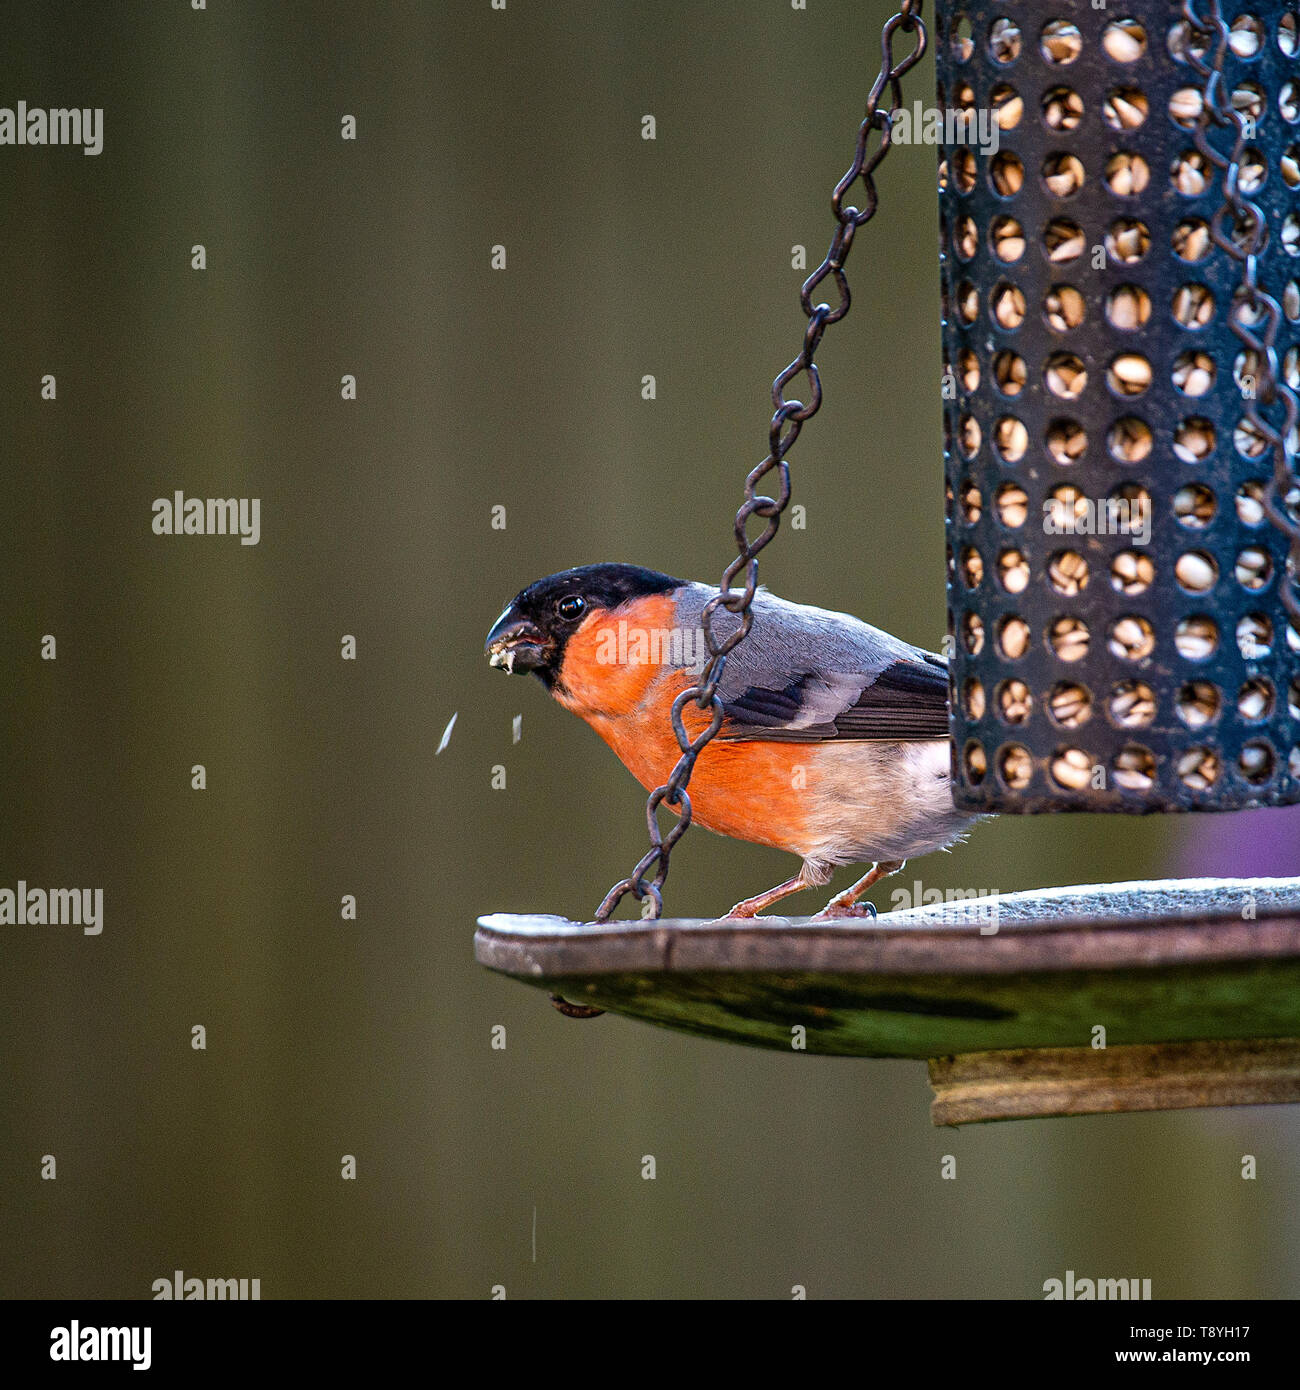 A Beautifully Coloured Adult Male Bullfinch Feeding on Sunflower Hearts from a Bird Feeder in a Garden in Alsager Cheshire England United Kingdom UK Stock Photo